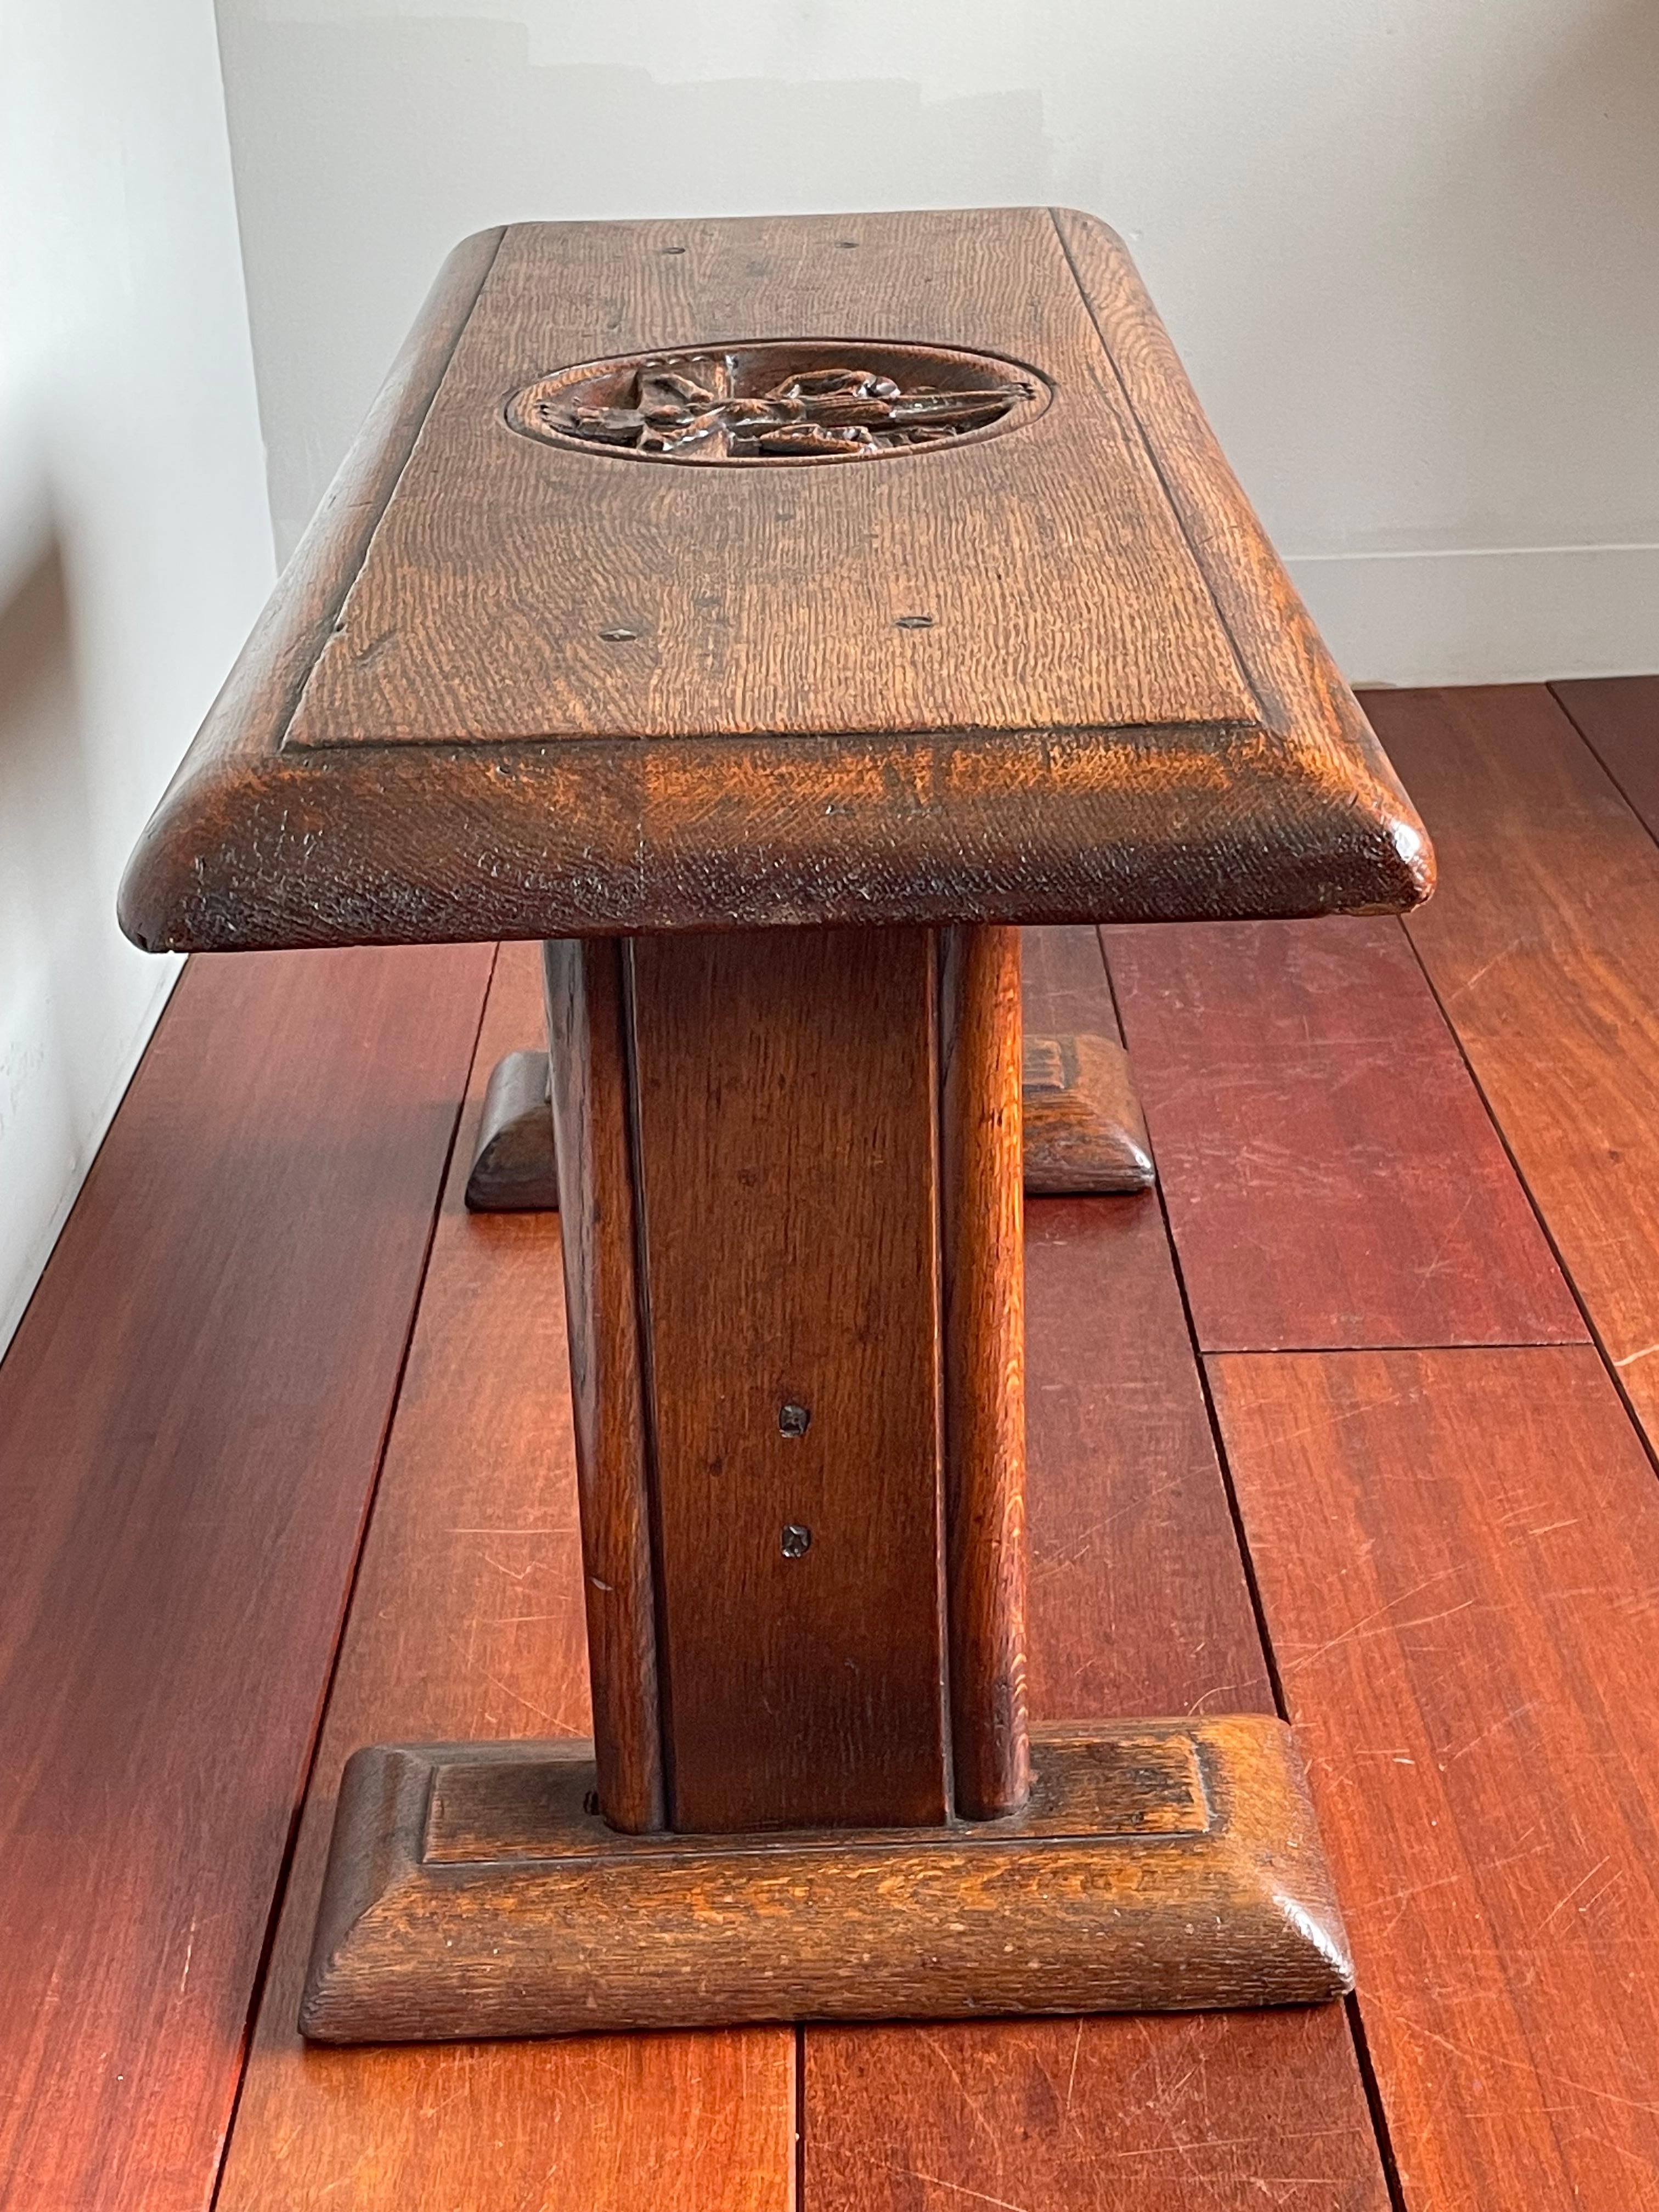 Gothic Revival Stool / Bench with Hand Carved Christ on Crucifix Sculpture 1800s For Sale 4